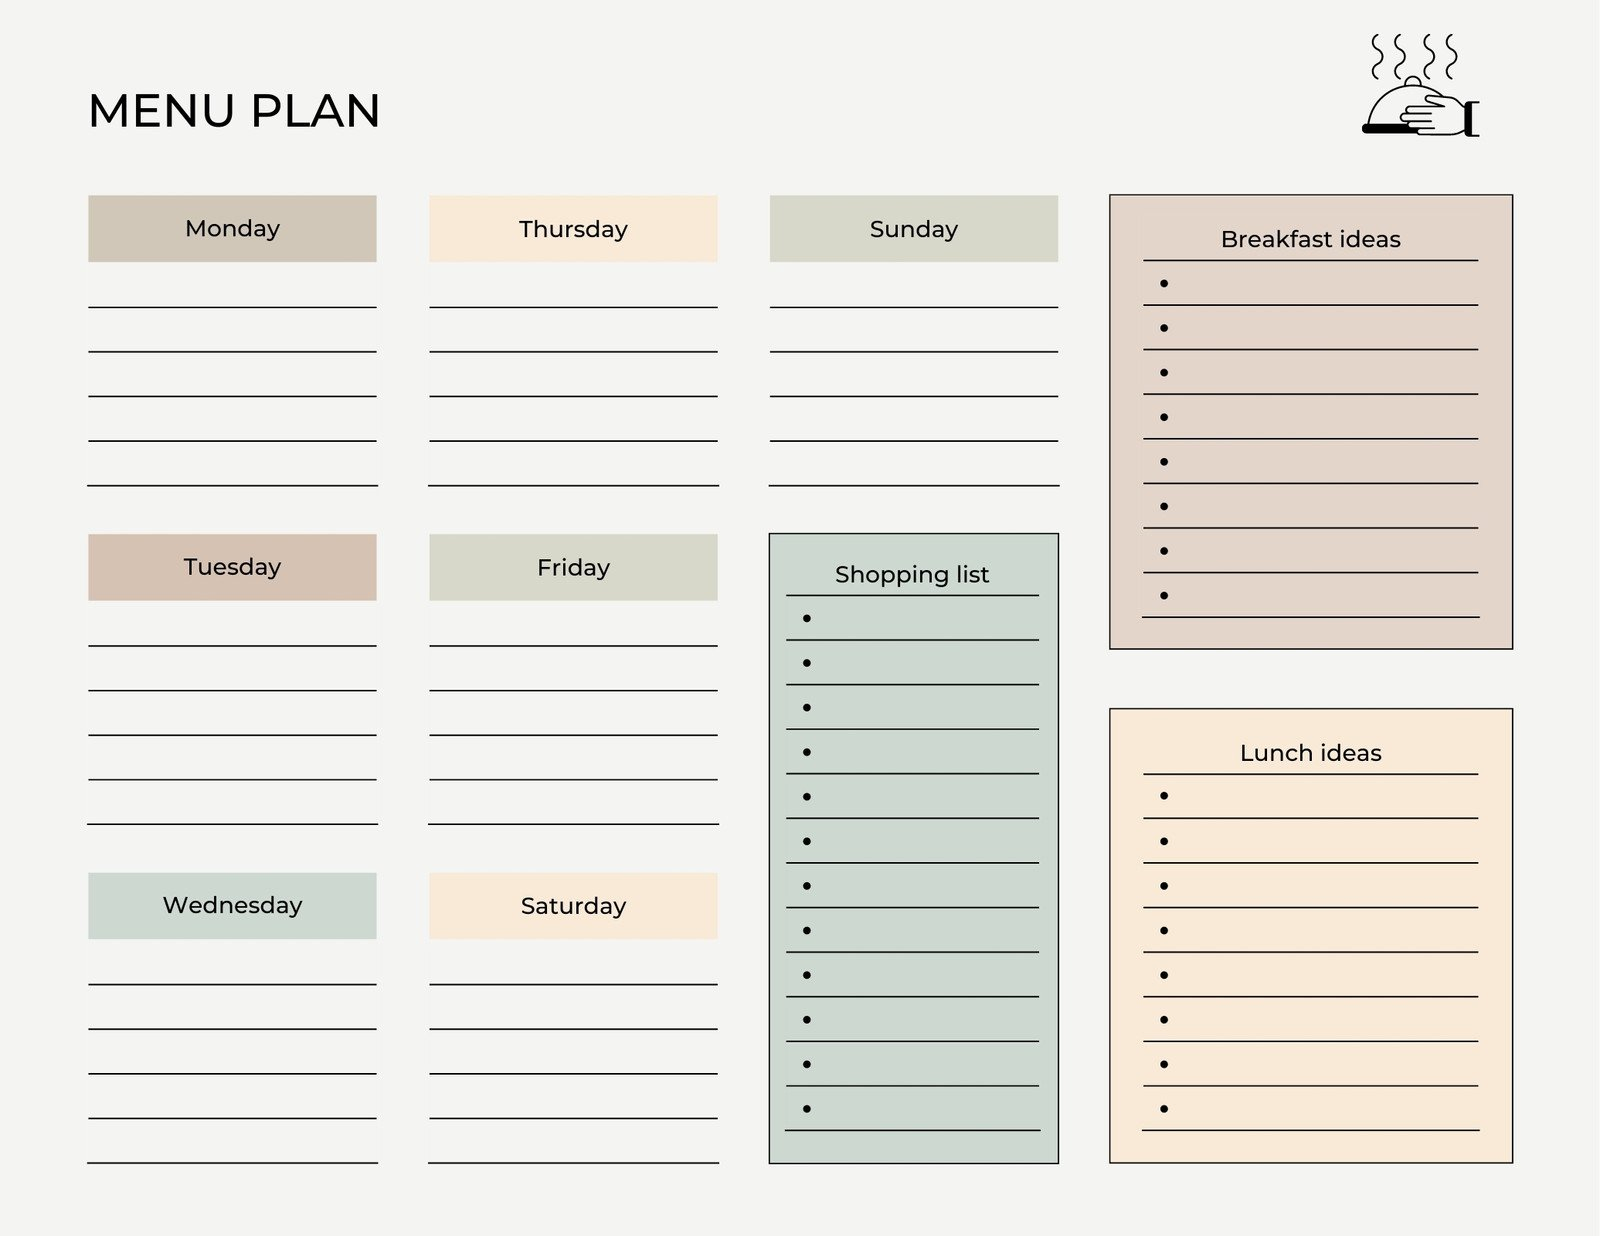 Free, Customizable Meal Planner Menu Templates | Canva for Free Printable Meal Planner